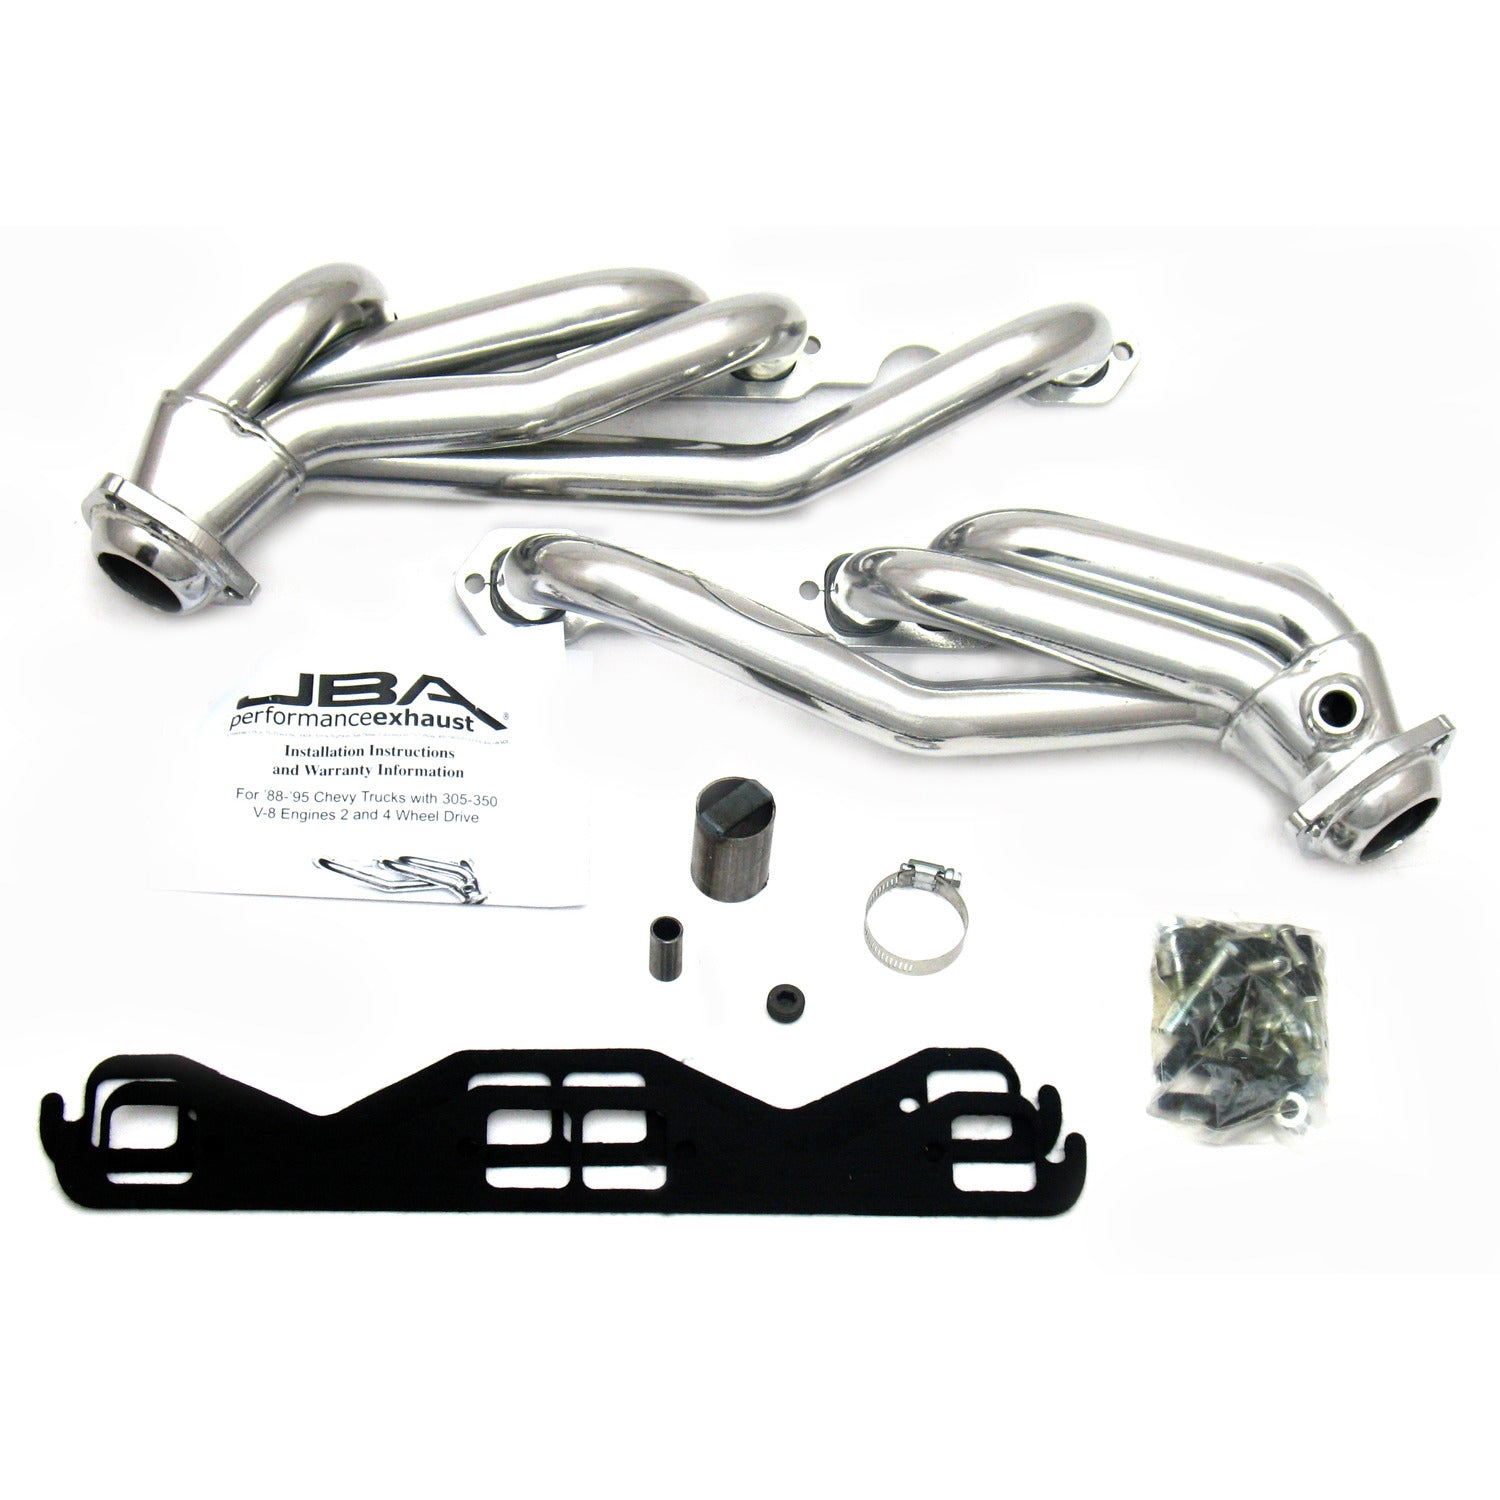 JBA Performance Exhaust 1830SJS 1 1/2" Header Shorty Stainless Steel 88-95 GM Truck 5.0L and 5.7L Silver Ceramic